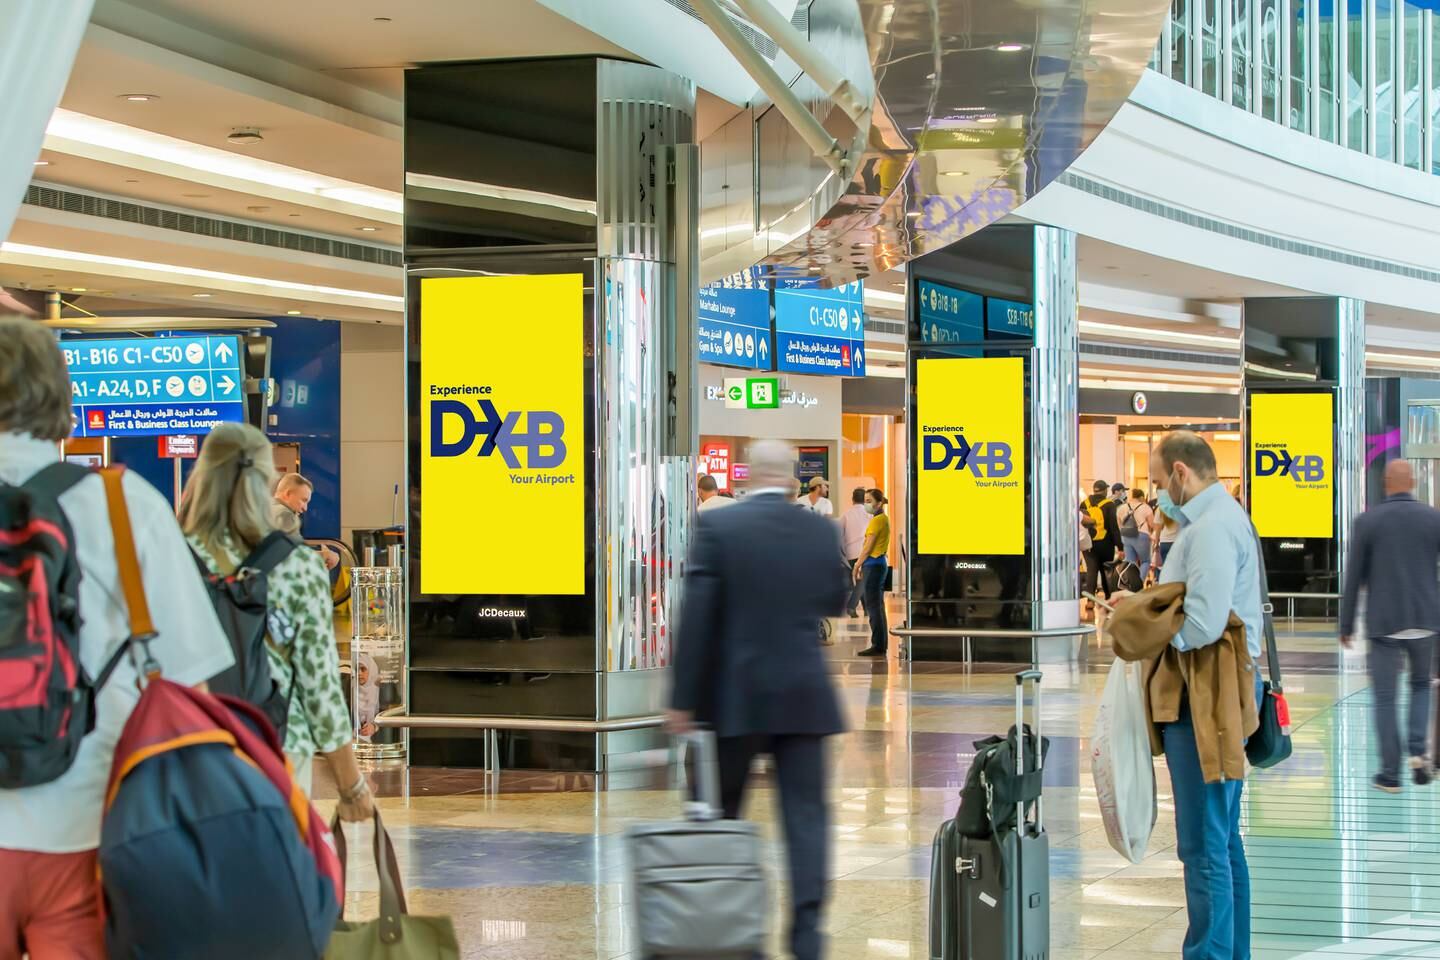 Dubai Airports and Emirates have shared some tips for travellers on how to beat the Eid rush. Photo: DXB